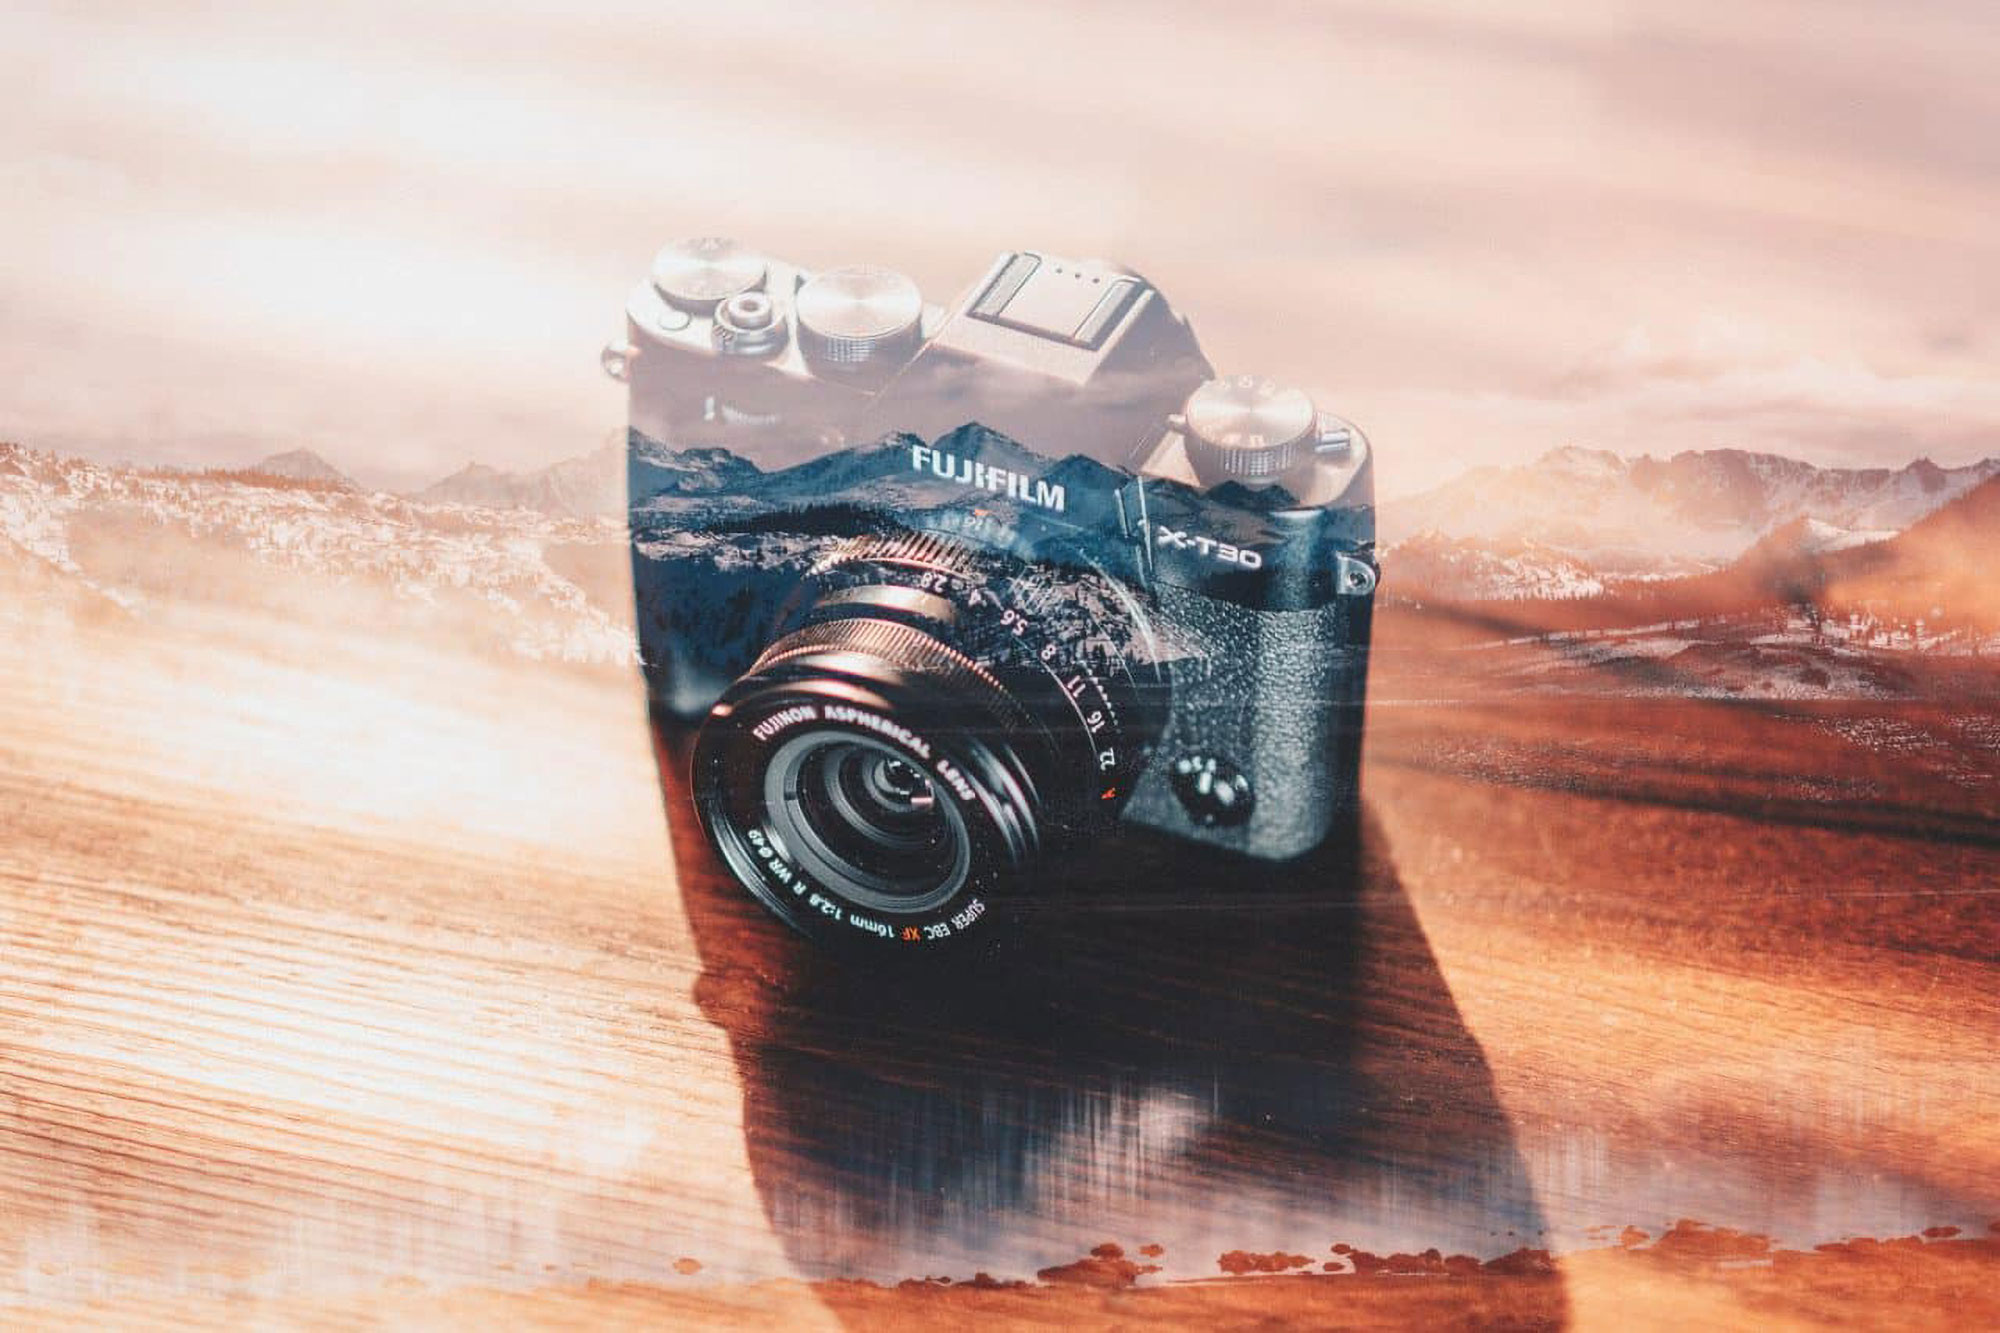 Creating memories and crafting legacy: An adventure with the Fujifilm X-T30